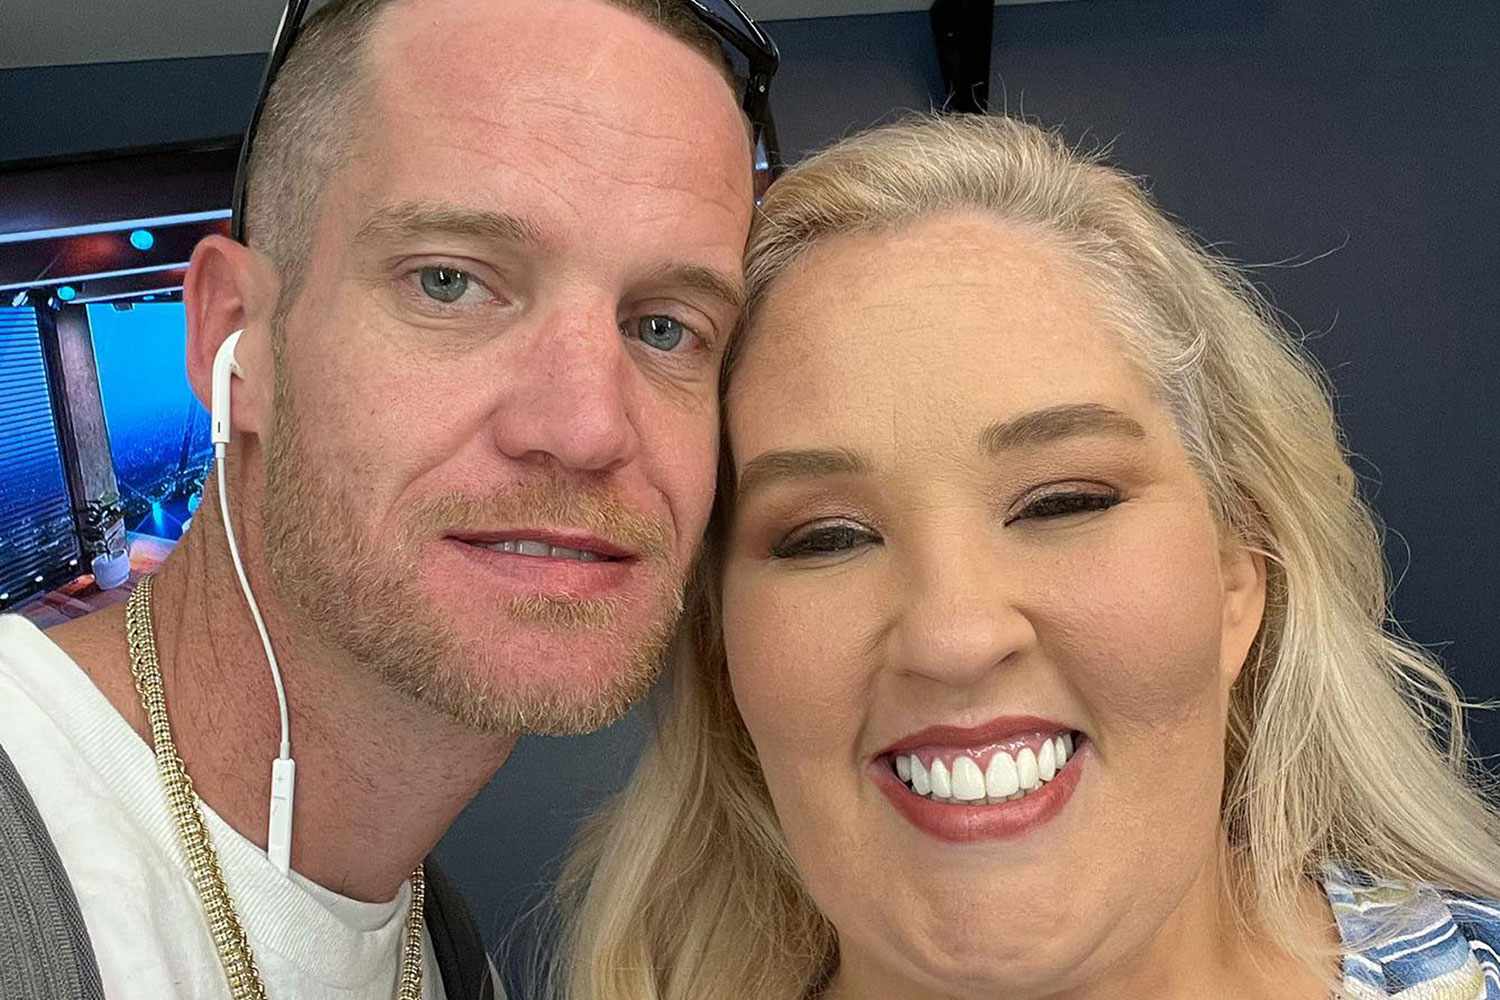 Mama June Praises Husband for Helping Her Family amid Hardships (Exclusive) [Video]